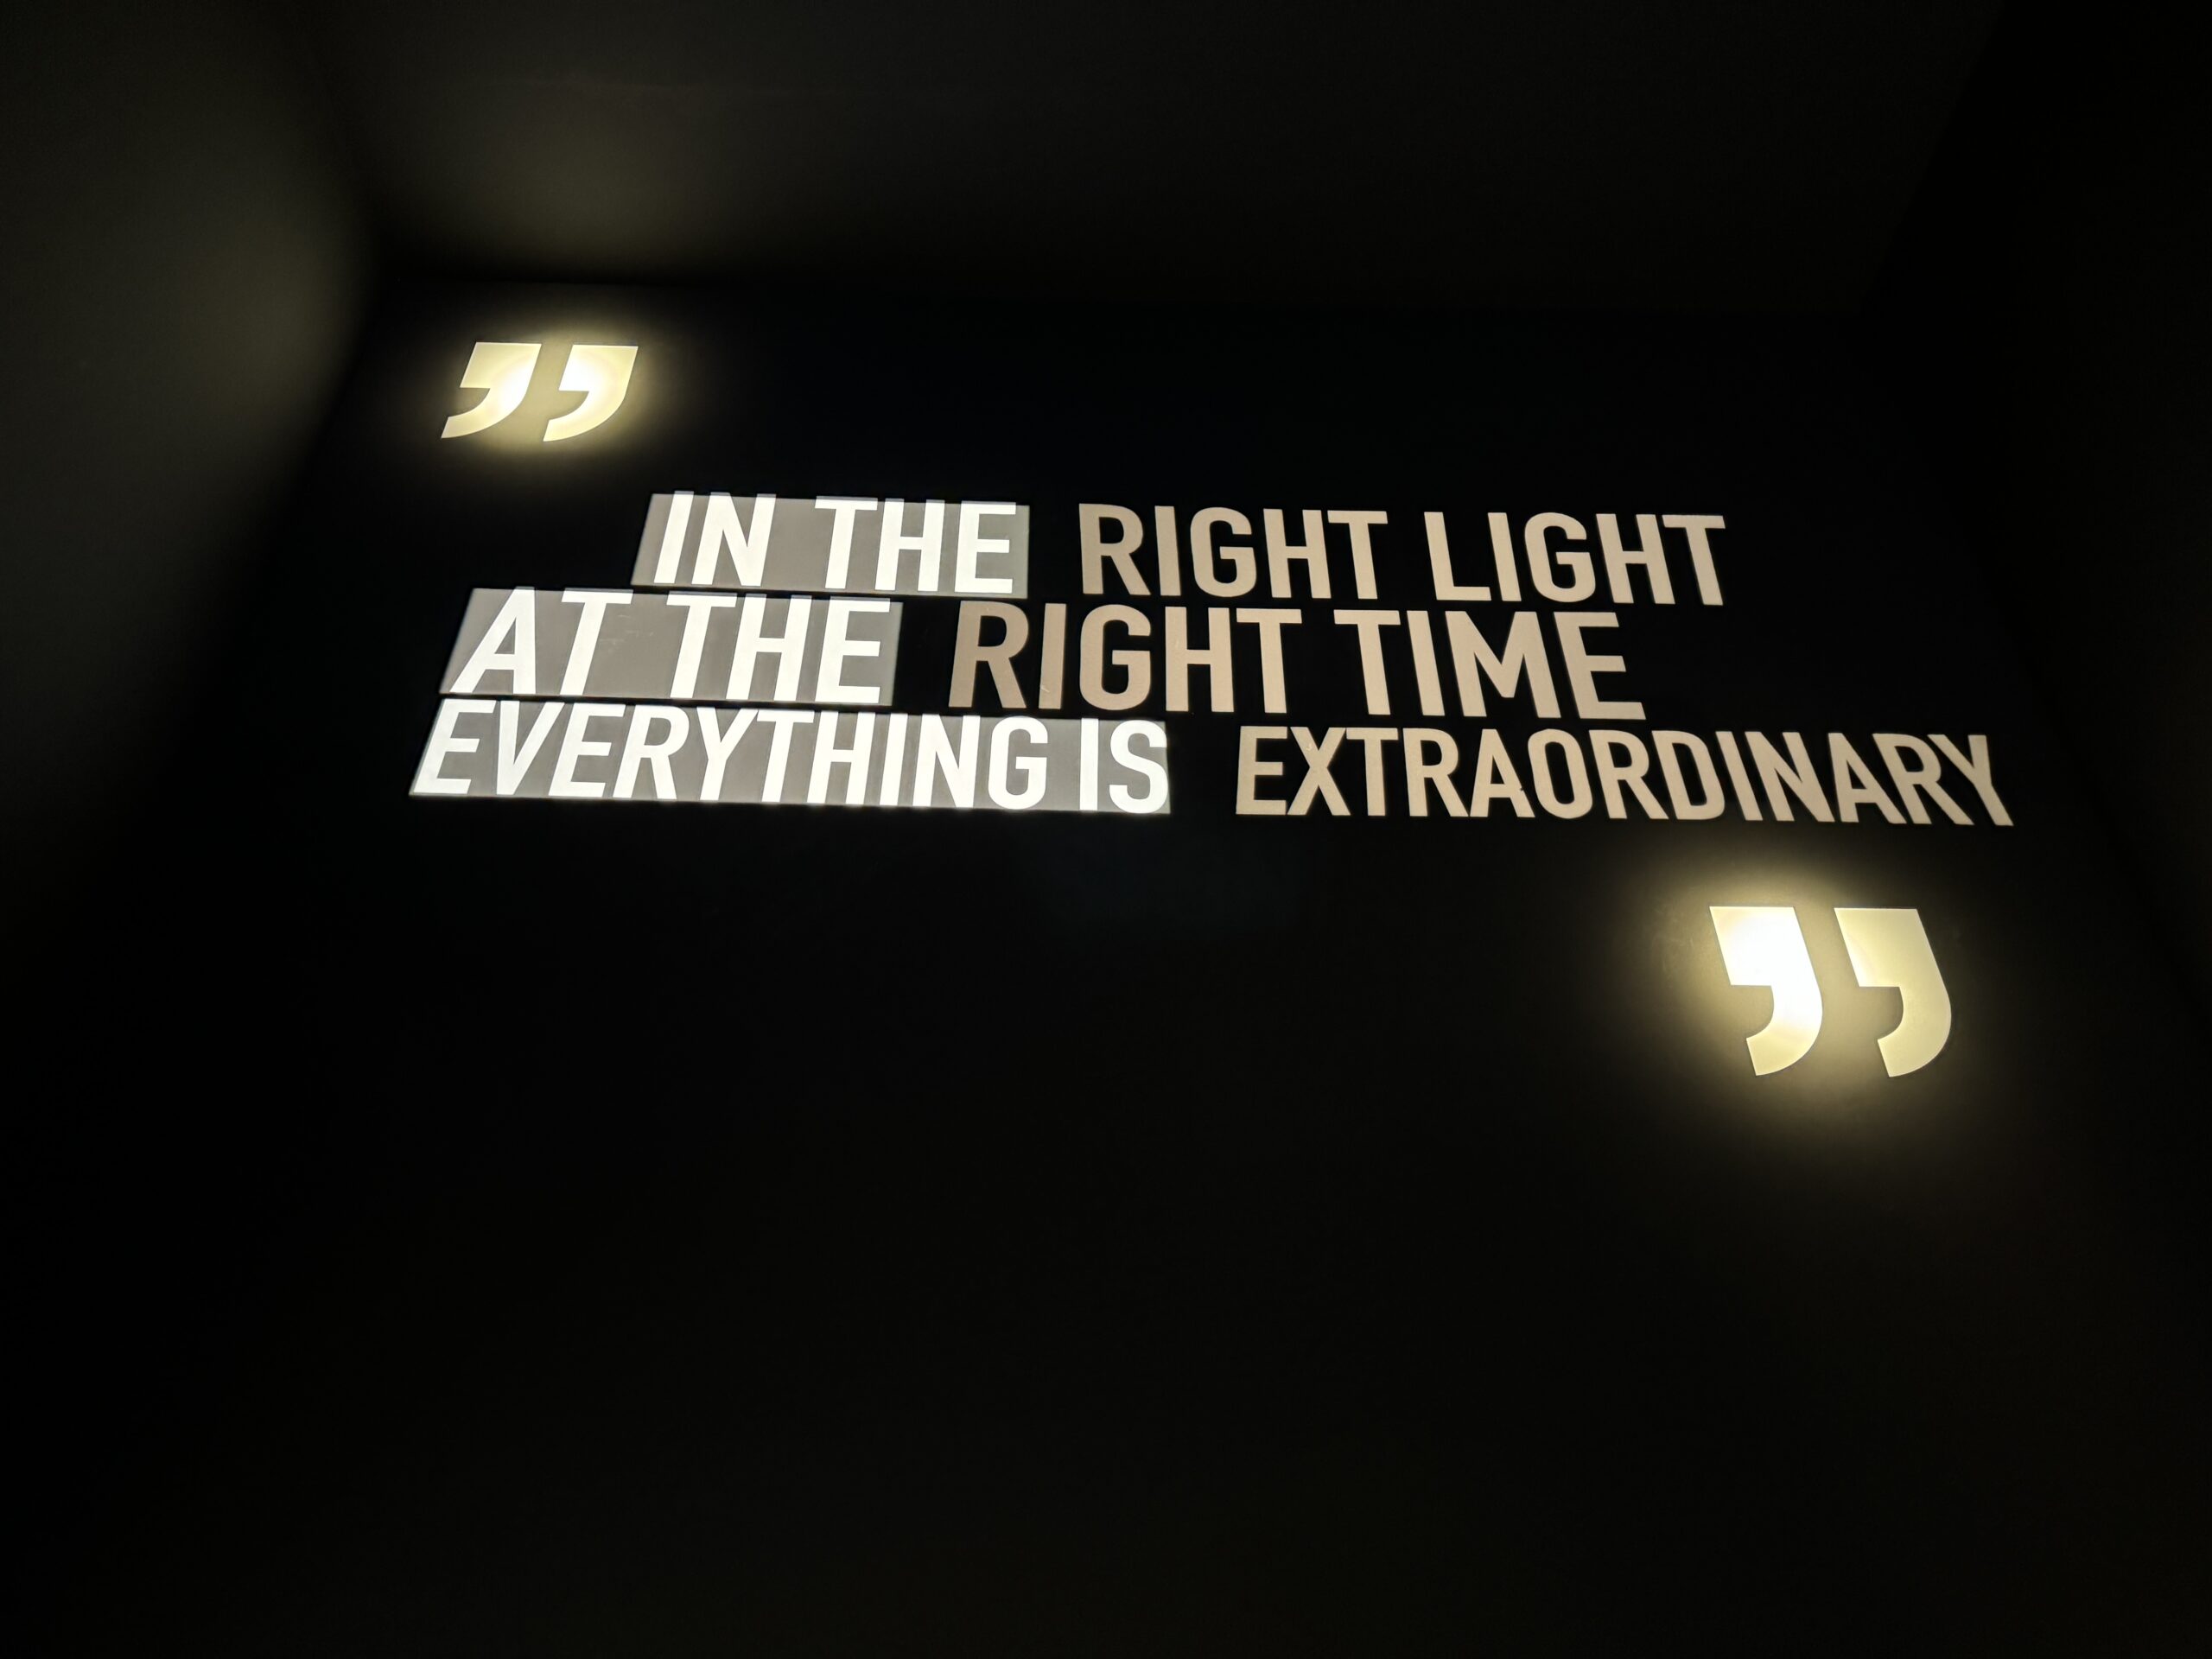 Luce&Light contrasts printed words (left) with projected words (right).